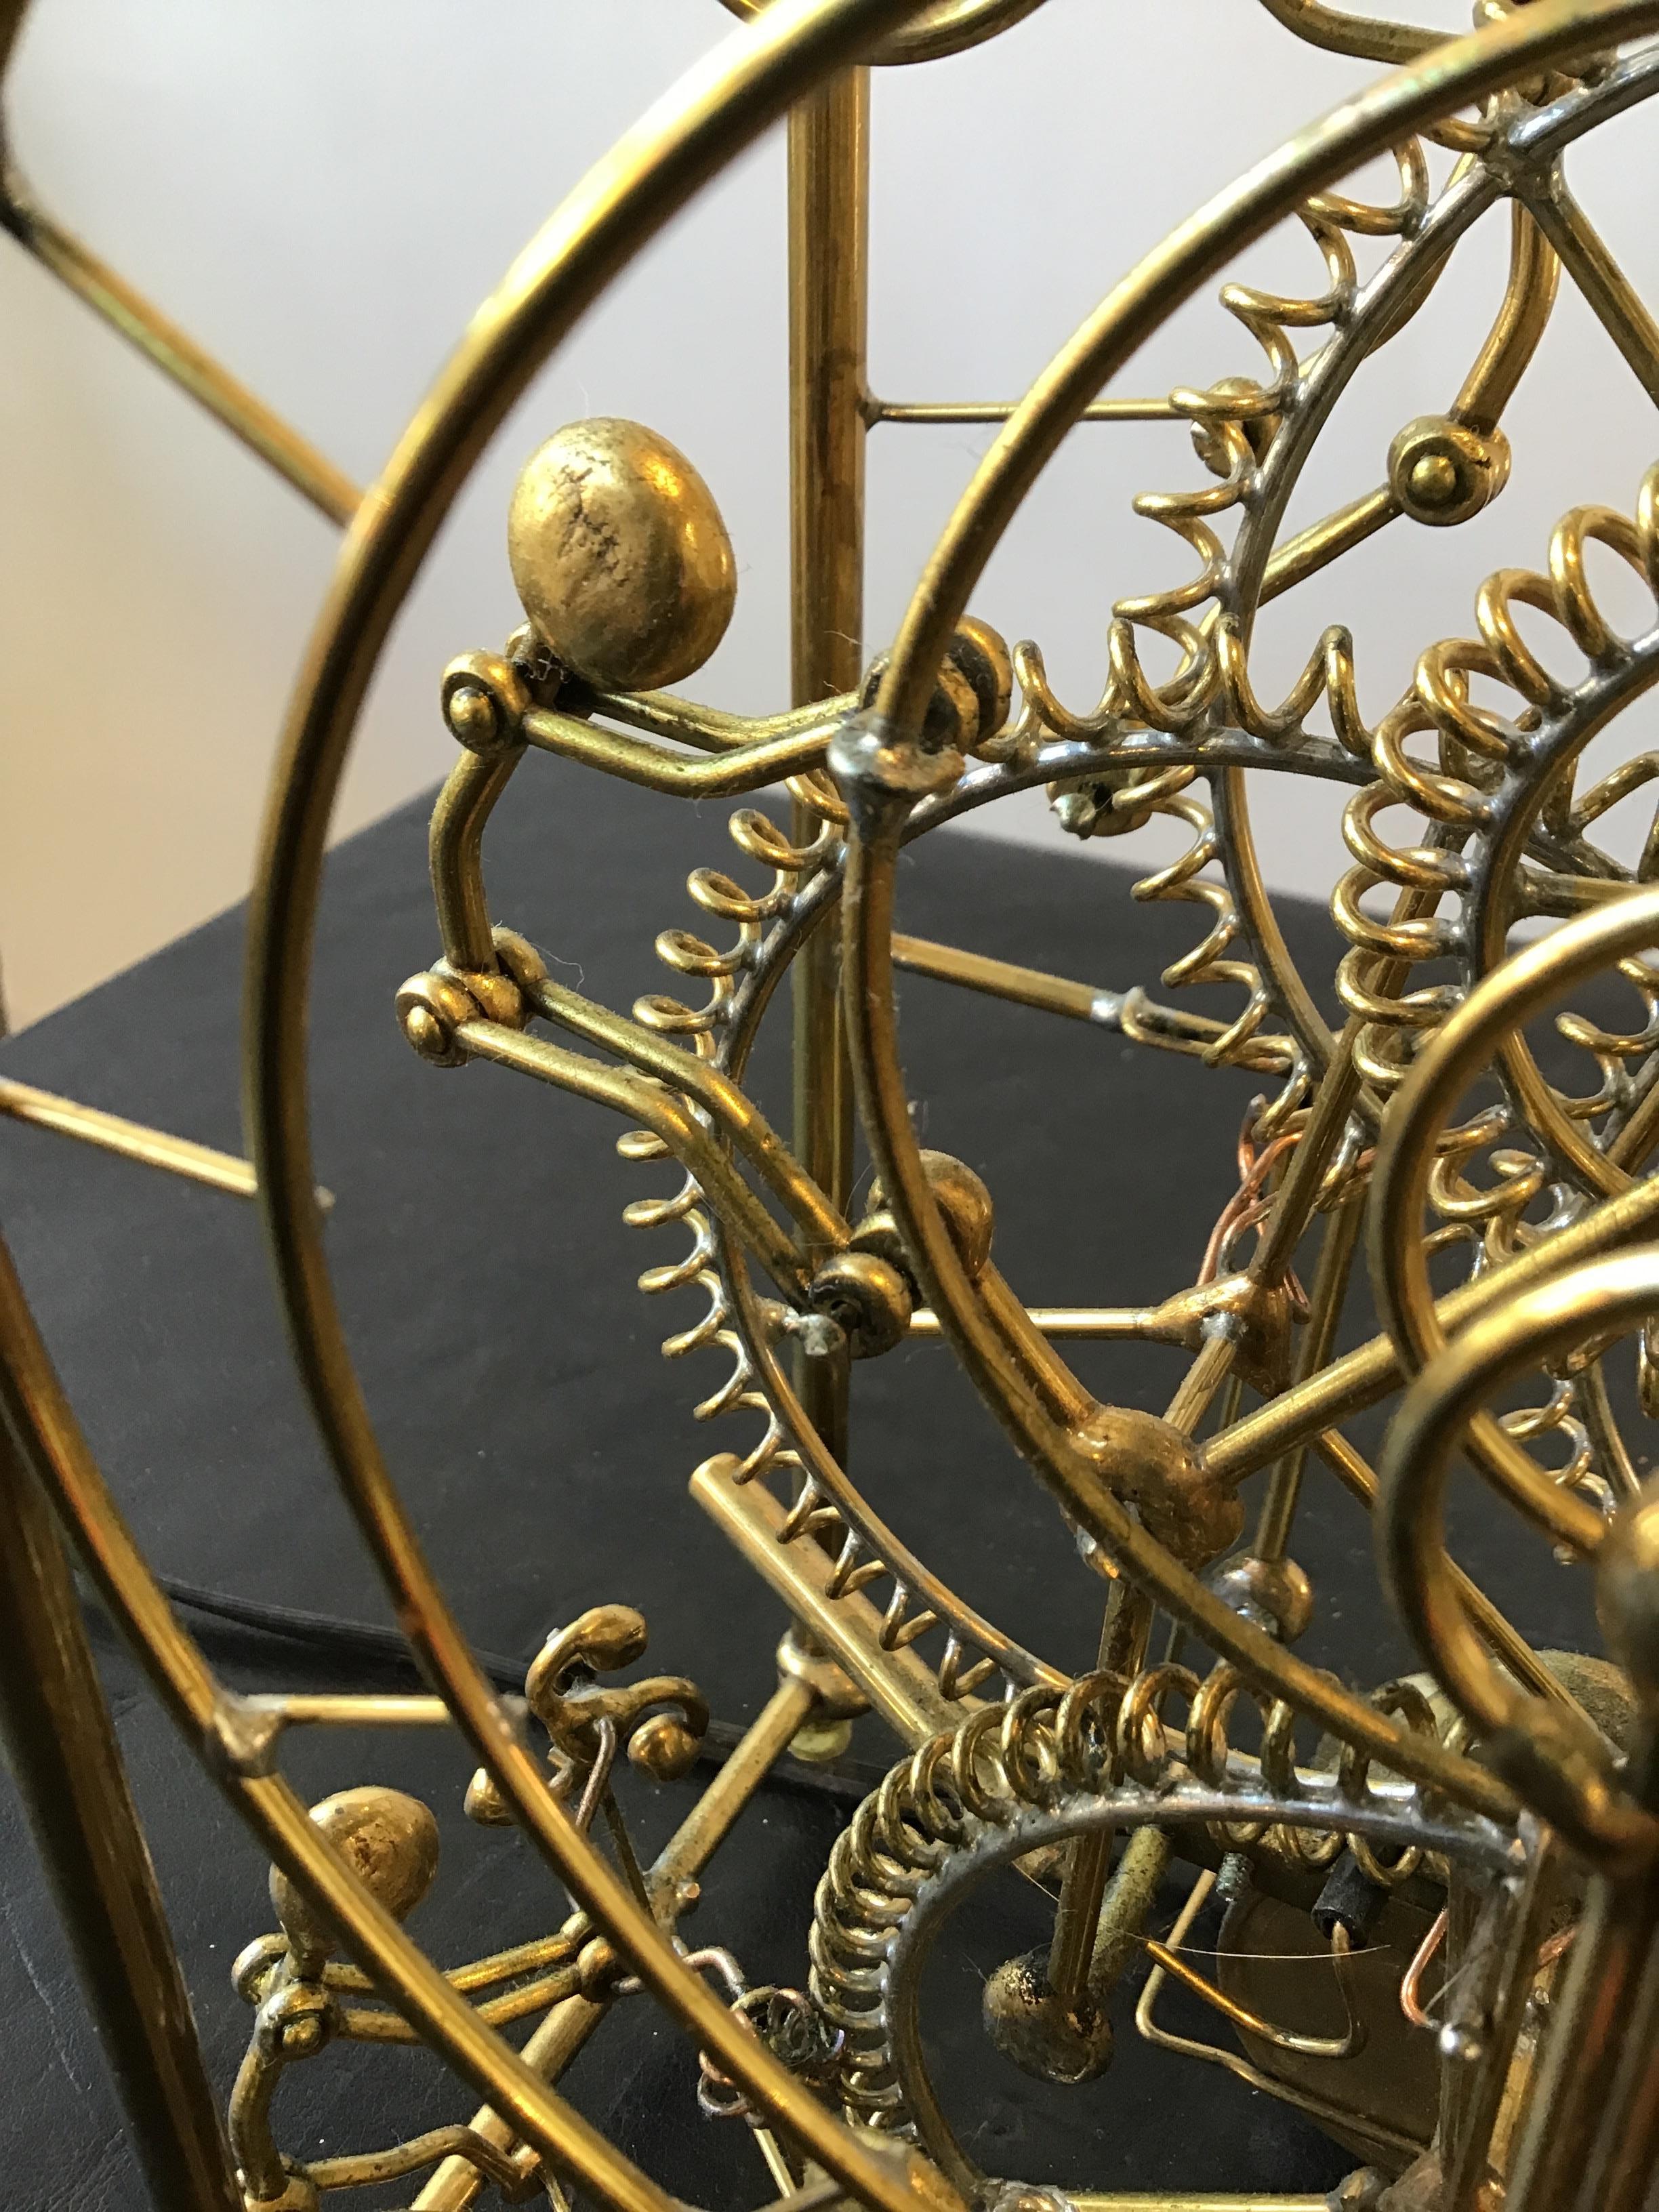 Brass Kinetic Sculpture Motion Clock by Gordon Bradt for Kinetco